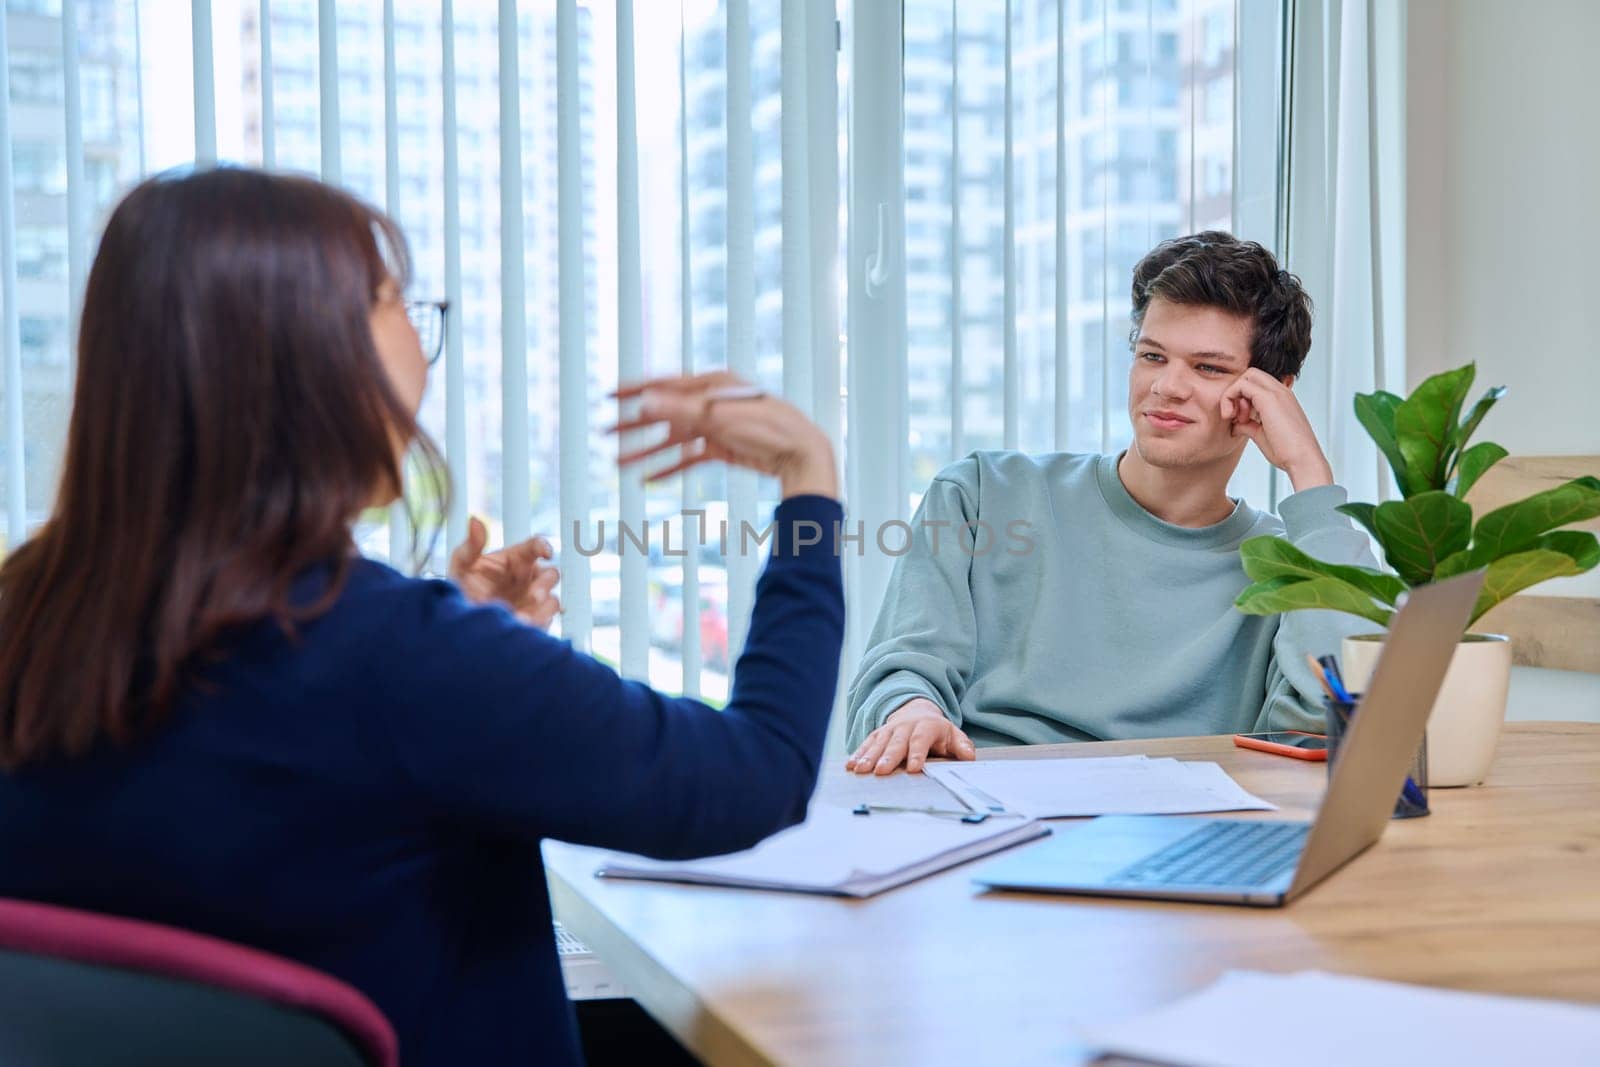 School psychologist, social worker supporting guy student, sitting in office of educational building. Mental health of youth, psychology, psychotherapy, therapy, professional help support